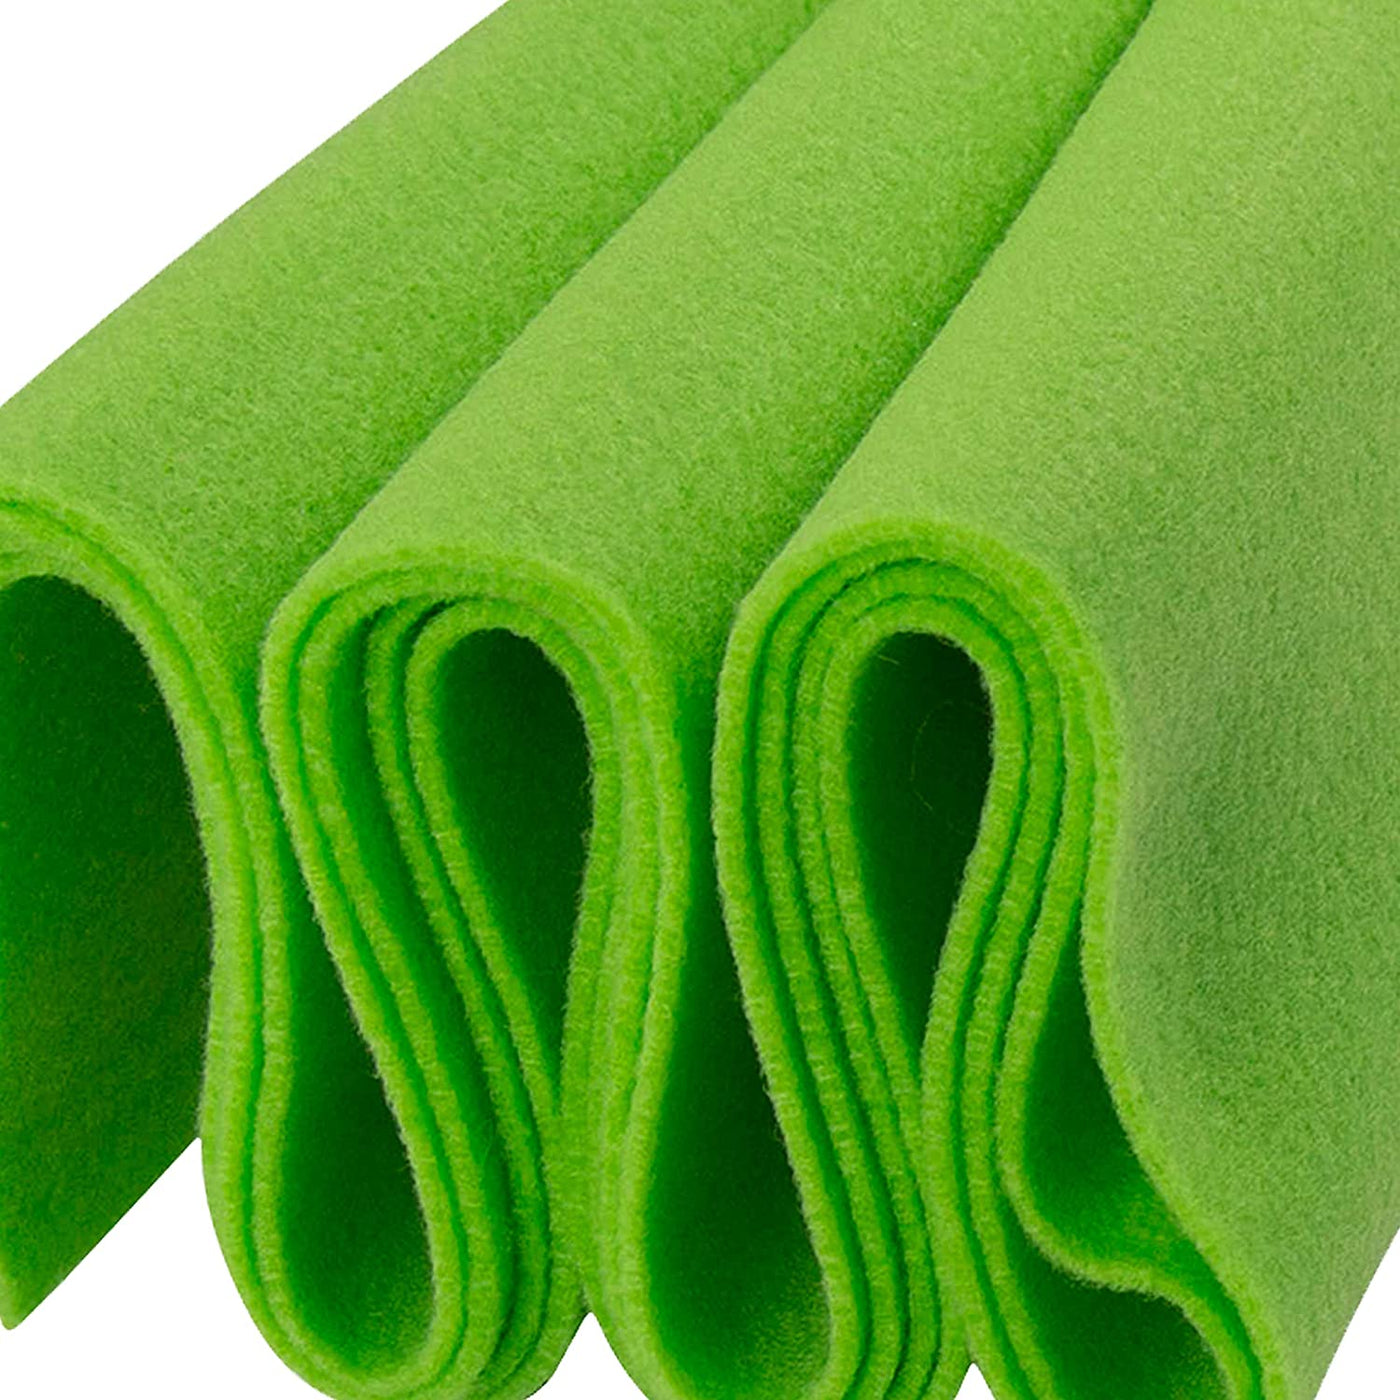 FabricLA | Acrylic Felt Craft Fabric by the Yard | 72" Inch Wide | 1.6mm Thick | Sewing, Cushion, Padding, and DIY, Arts & Crafts | Lime | FabricLA.com